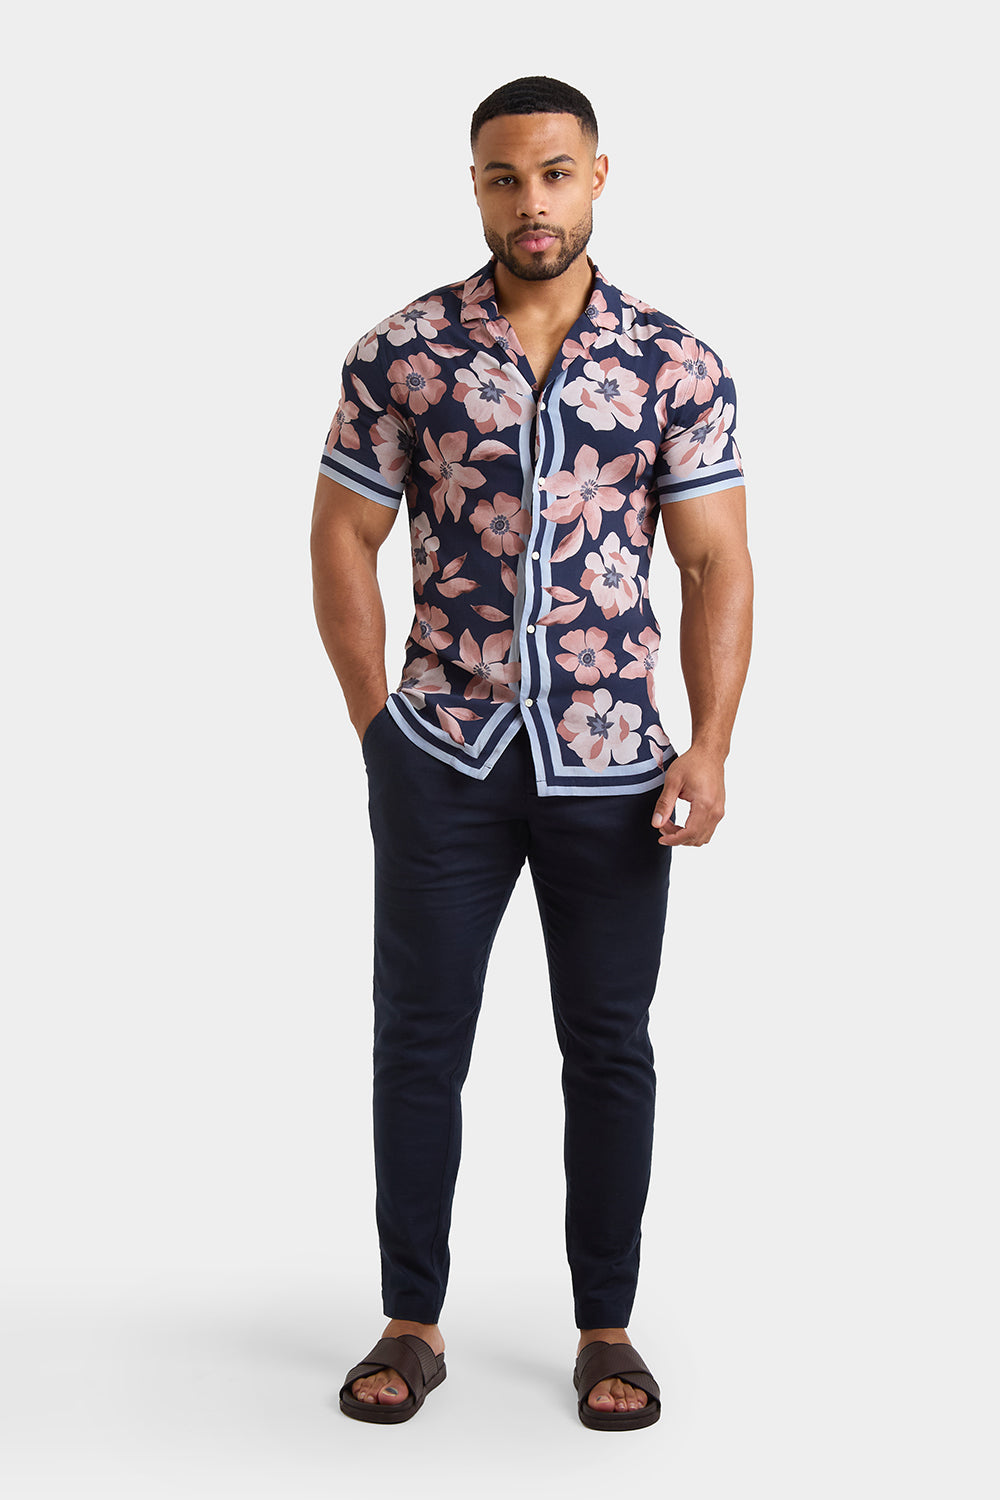 Printed Shirt in Terracotta Retro Floral - TAILORED ATHLETE - ROW